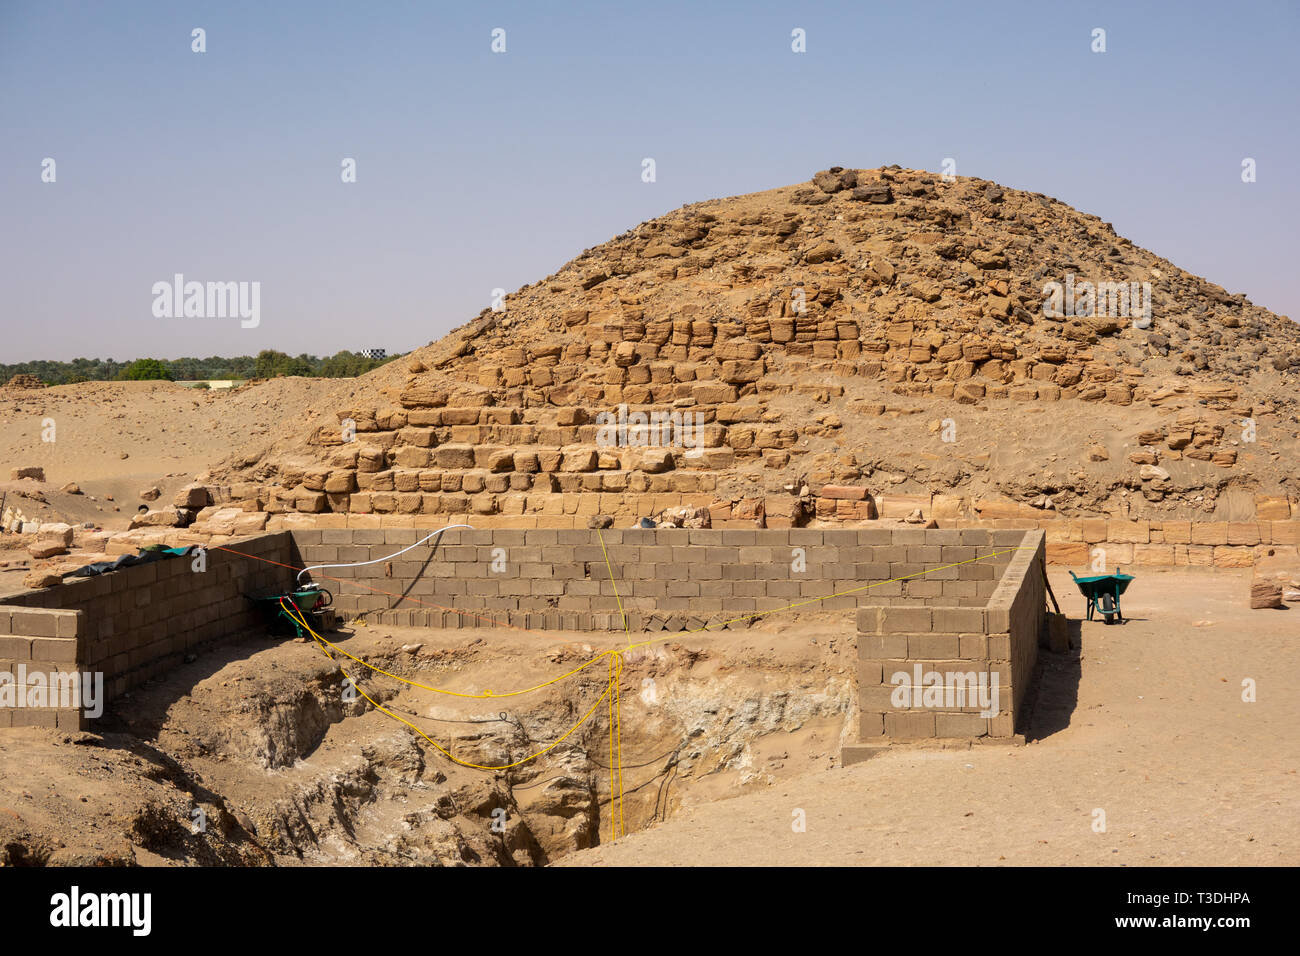 Nuri, Sudan, February 9., 2019: Temporary retaining wall in front of the Access via a staircase to the underground entrance of a pyramid of black phar Stock Photo